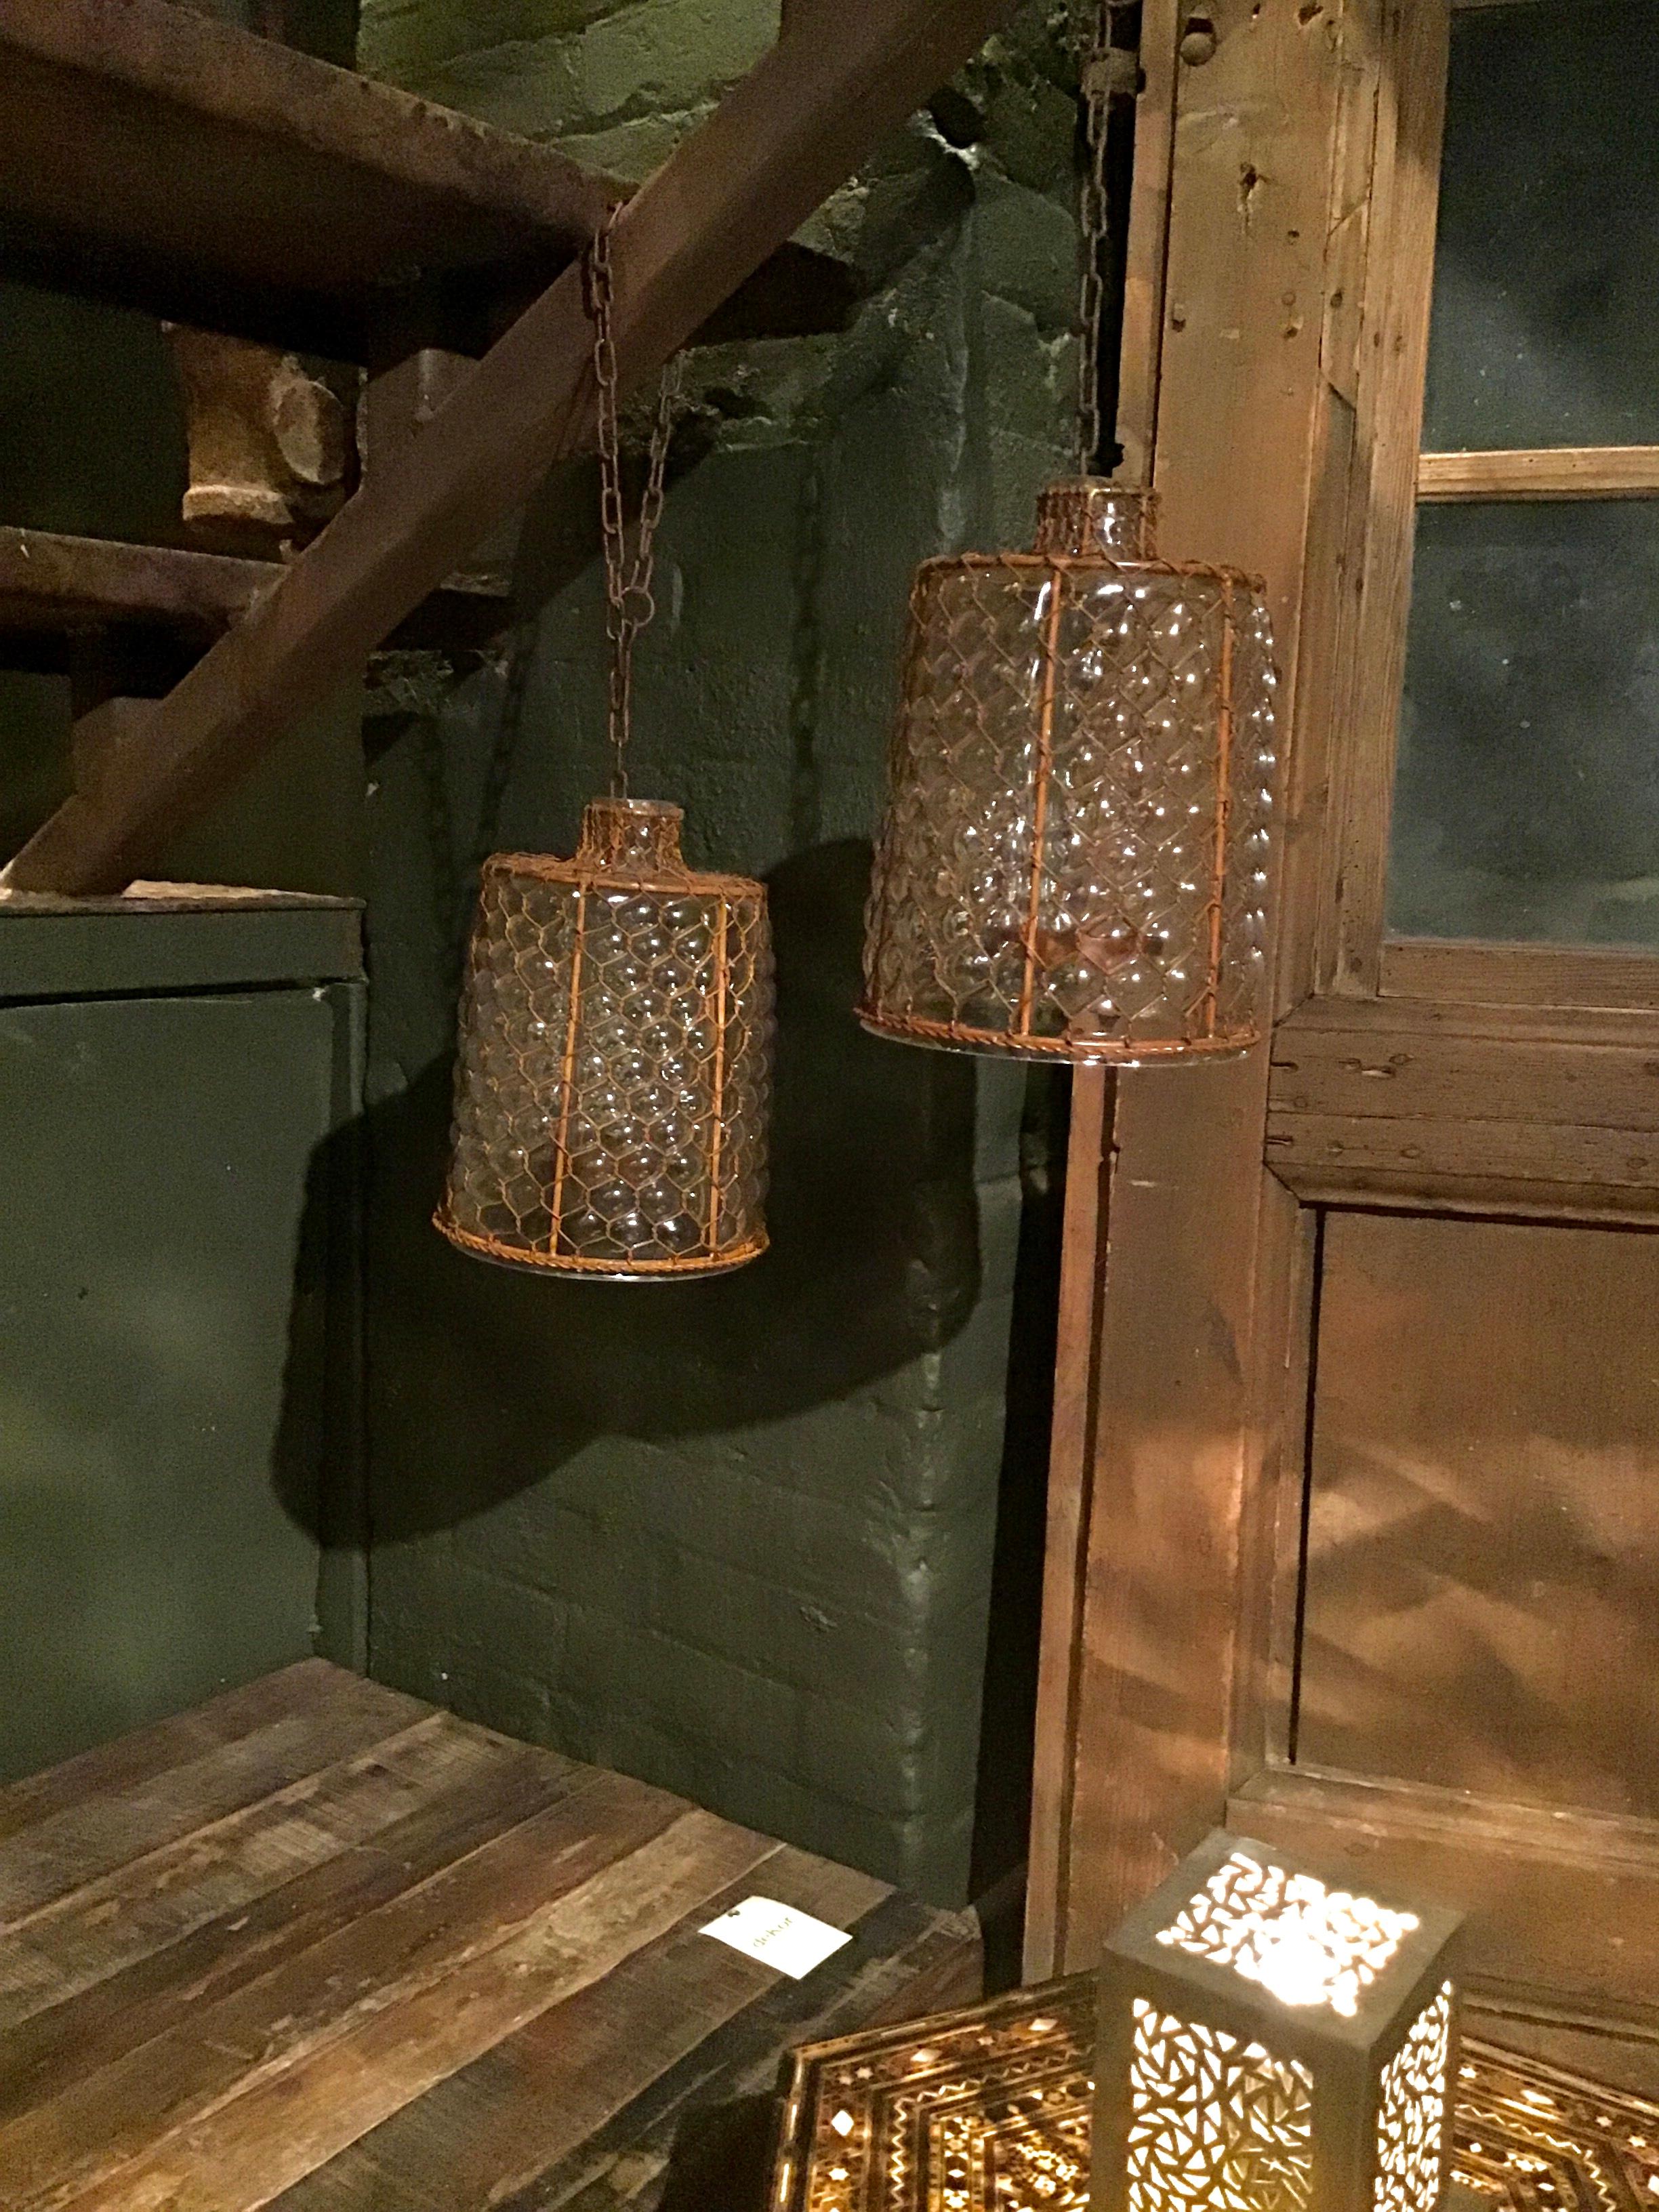 This cage lantern blends in nicely with farmhouse decor. Can be used indoor and outdoor to add rustic charm to any space.